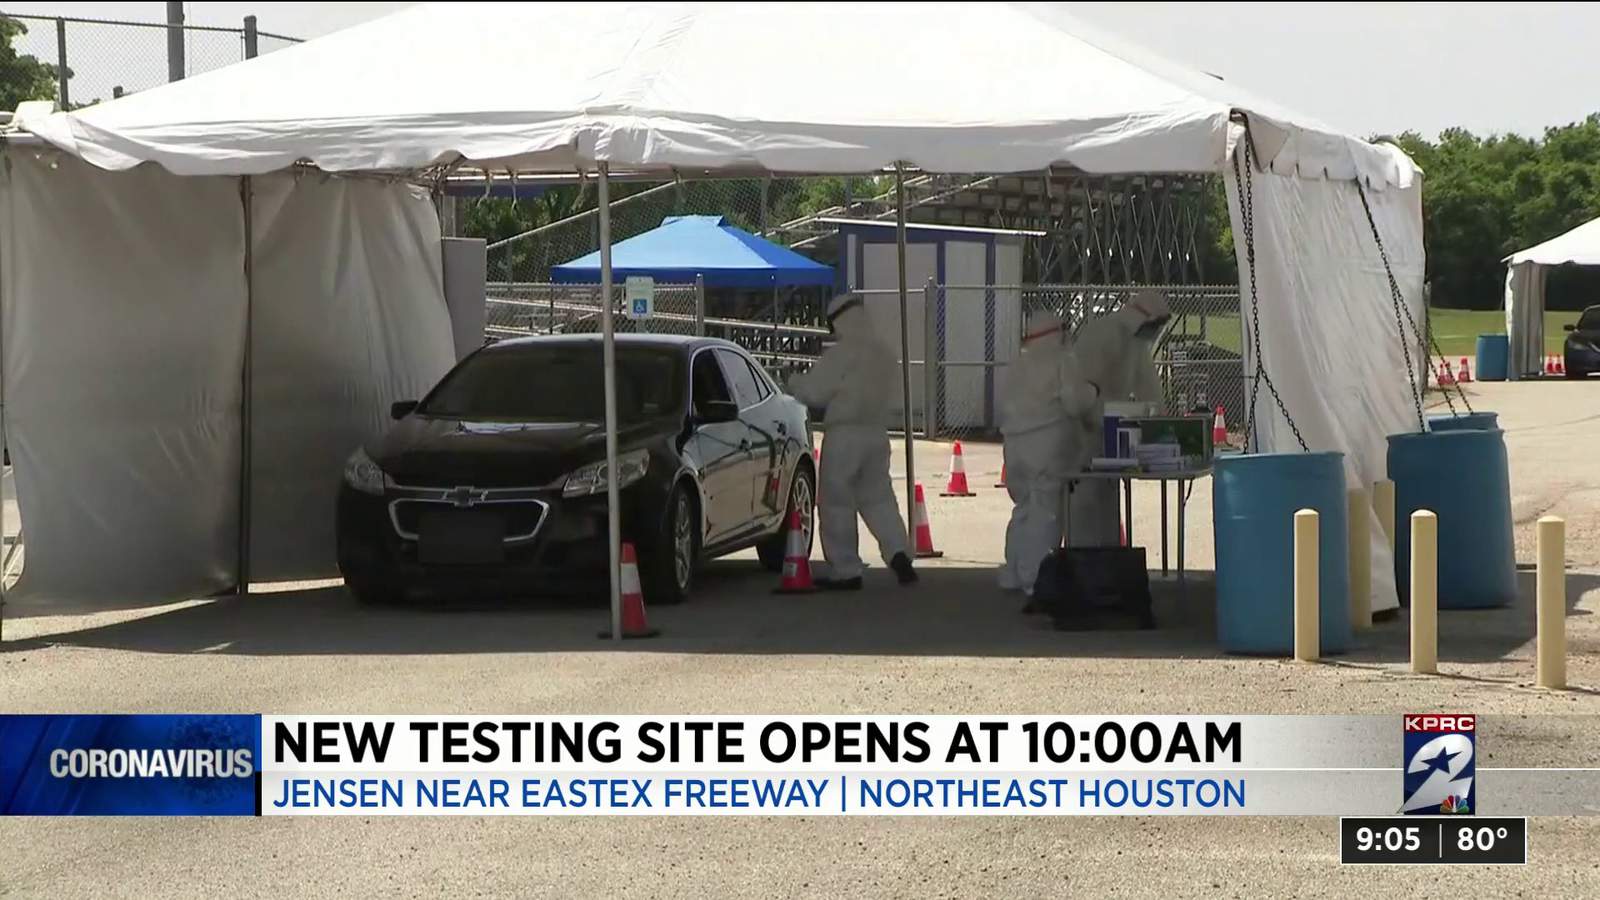 What you need to know about the new testing site in northeast Houston